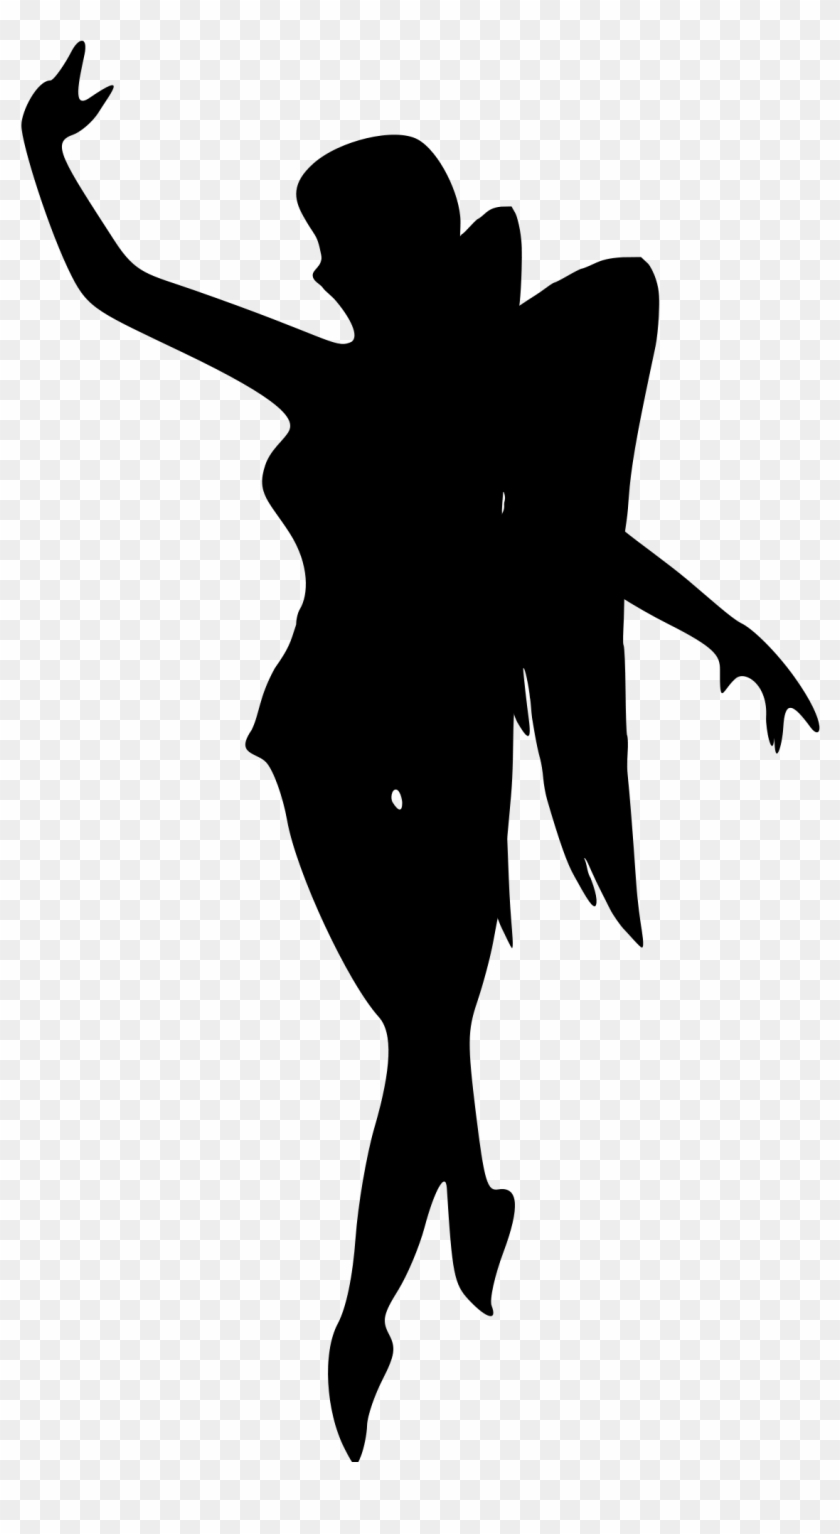 File - Fée2 - Svg - Fairy Silhouette Afro #1000662